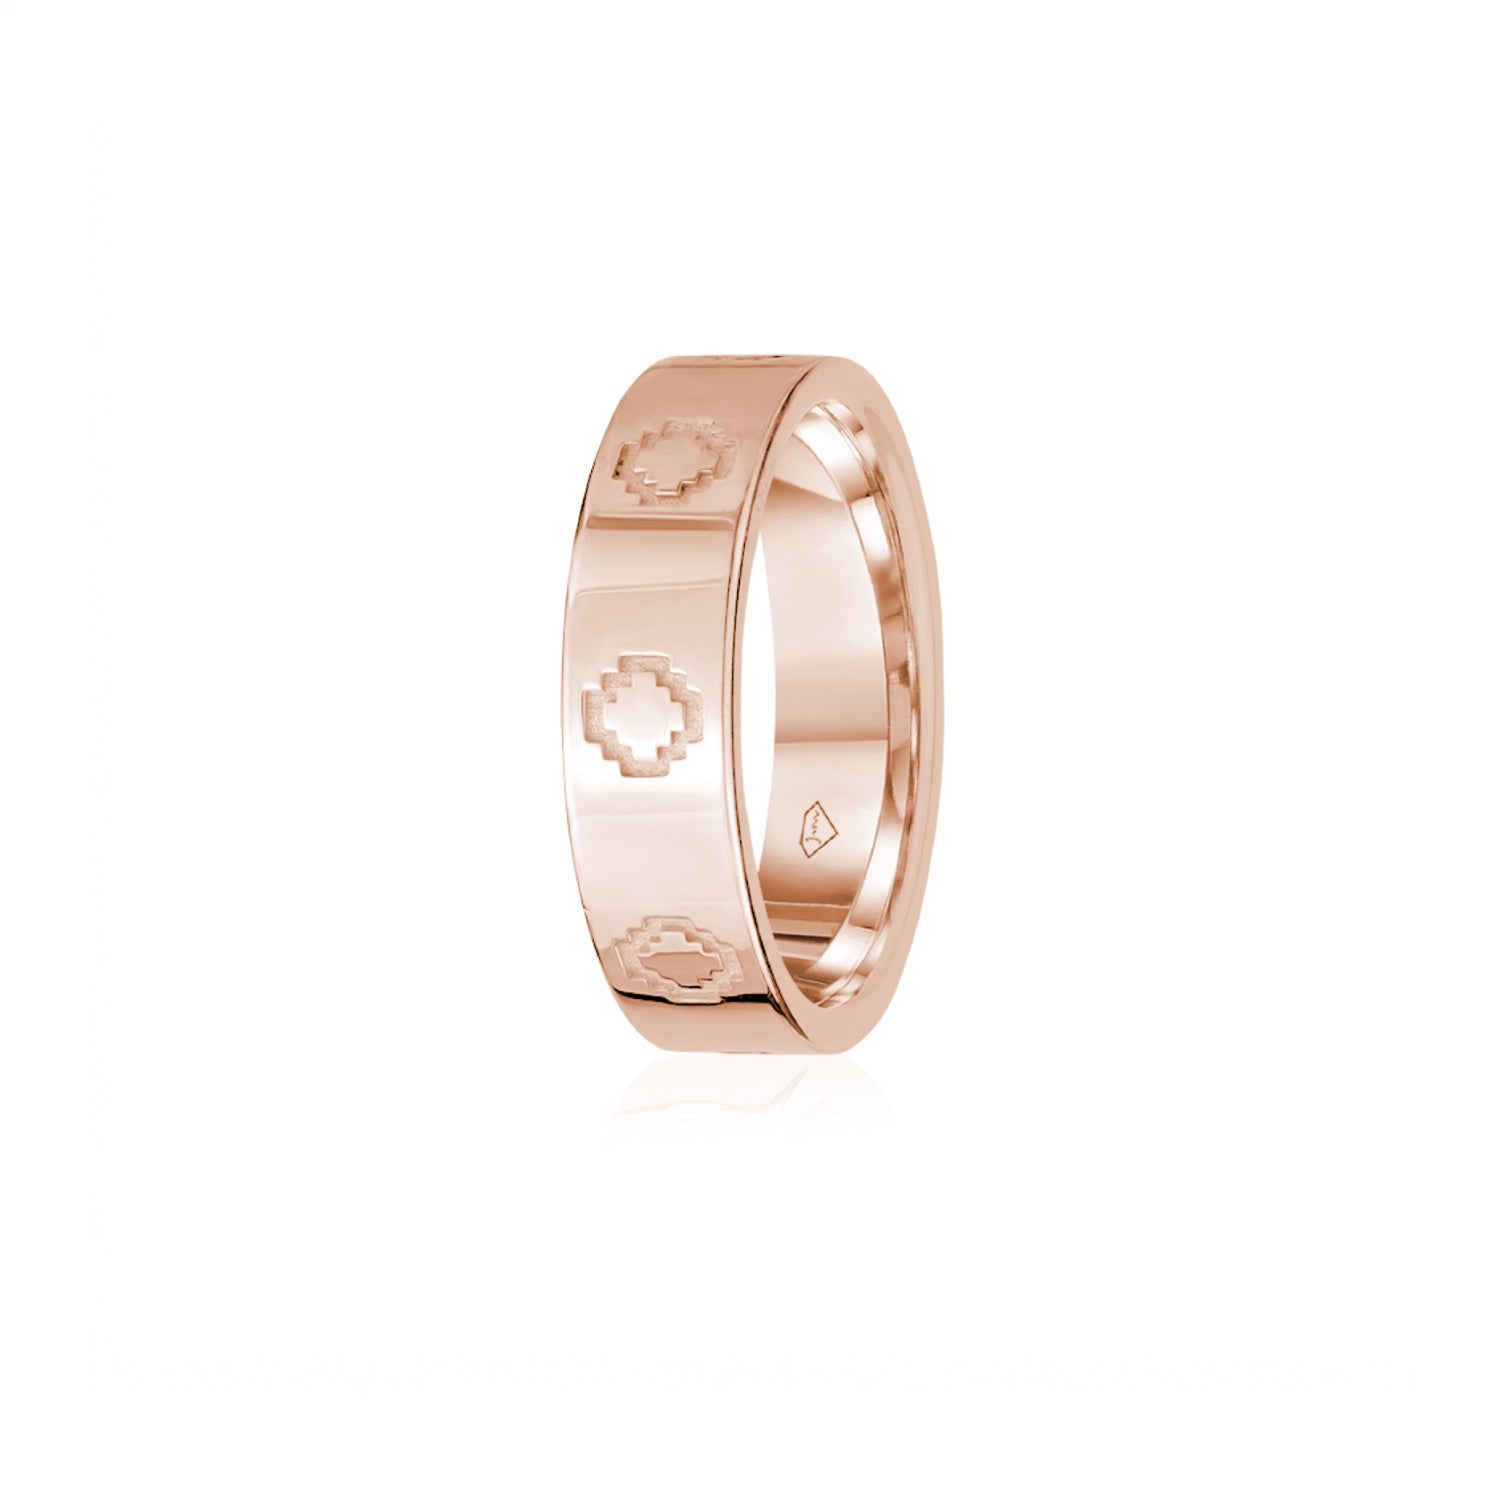 Step Motif Polished Finish Square Edge 8-9 mm Wedding Band in Rose Gold